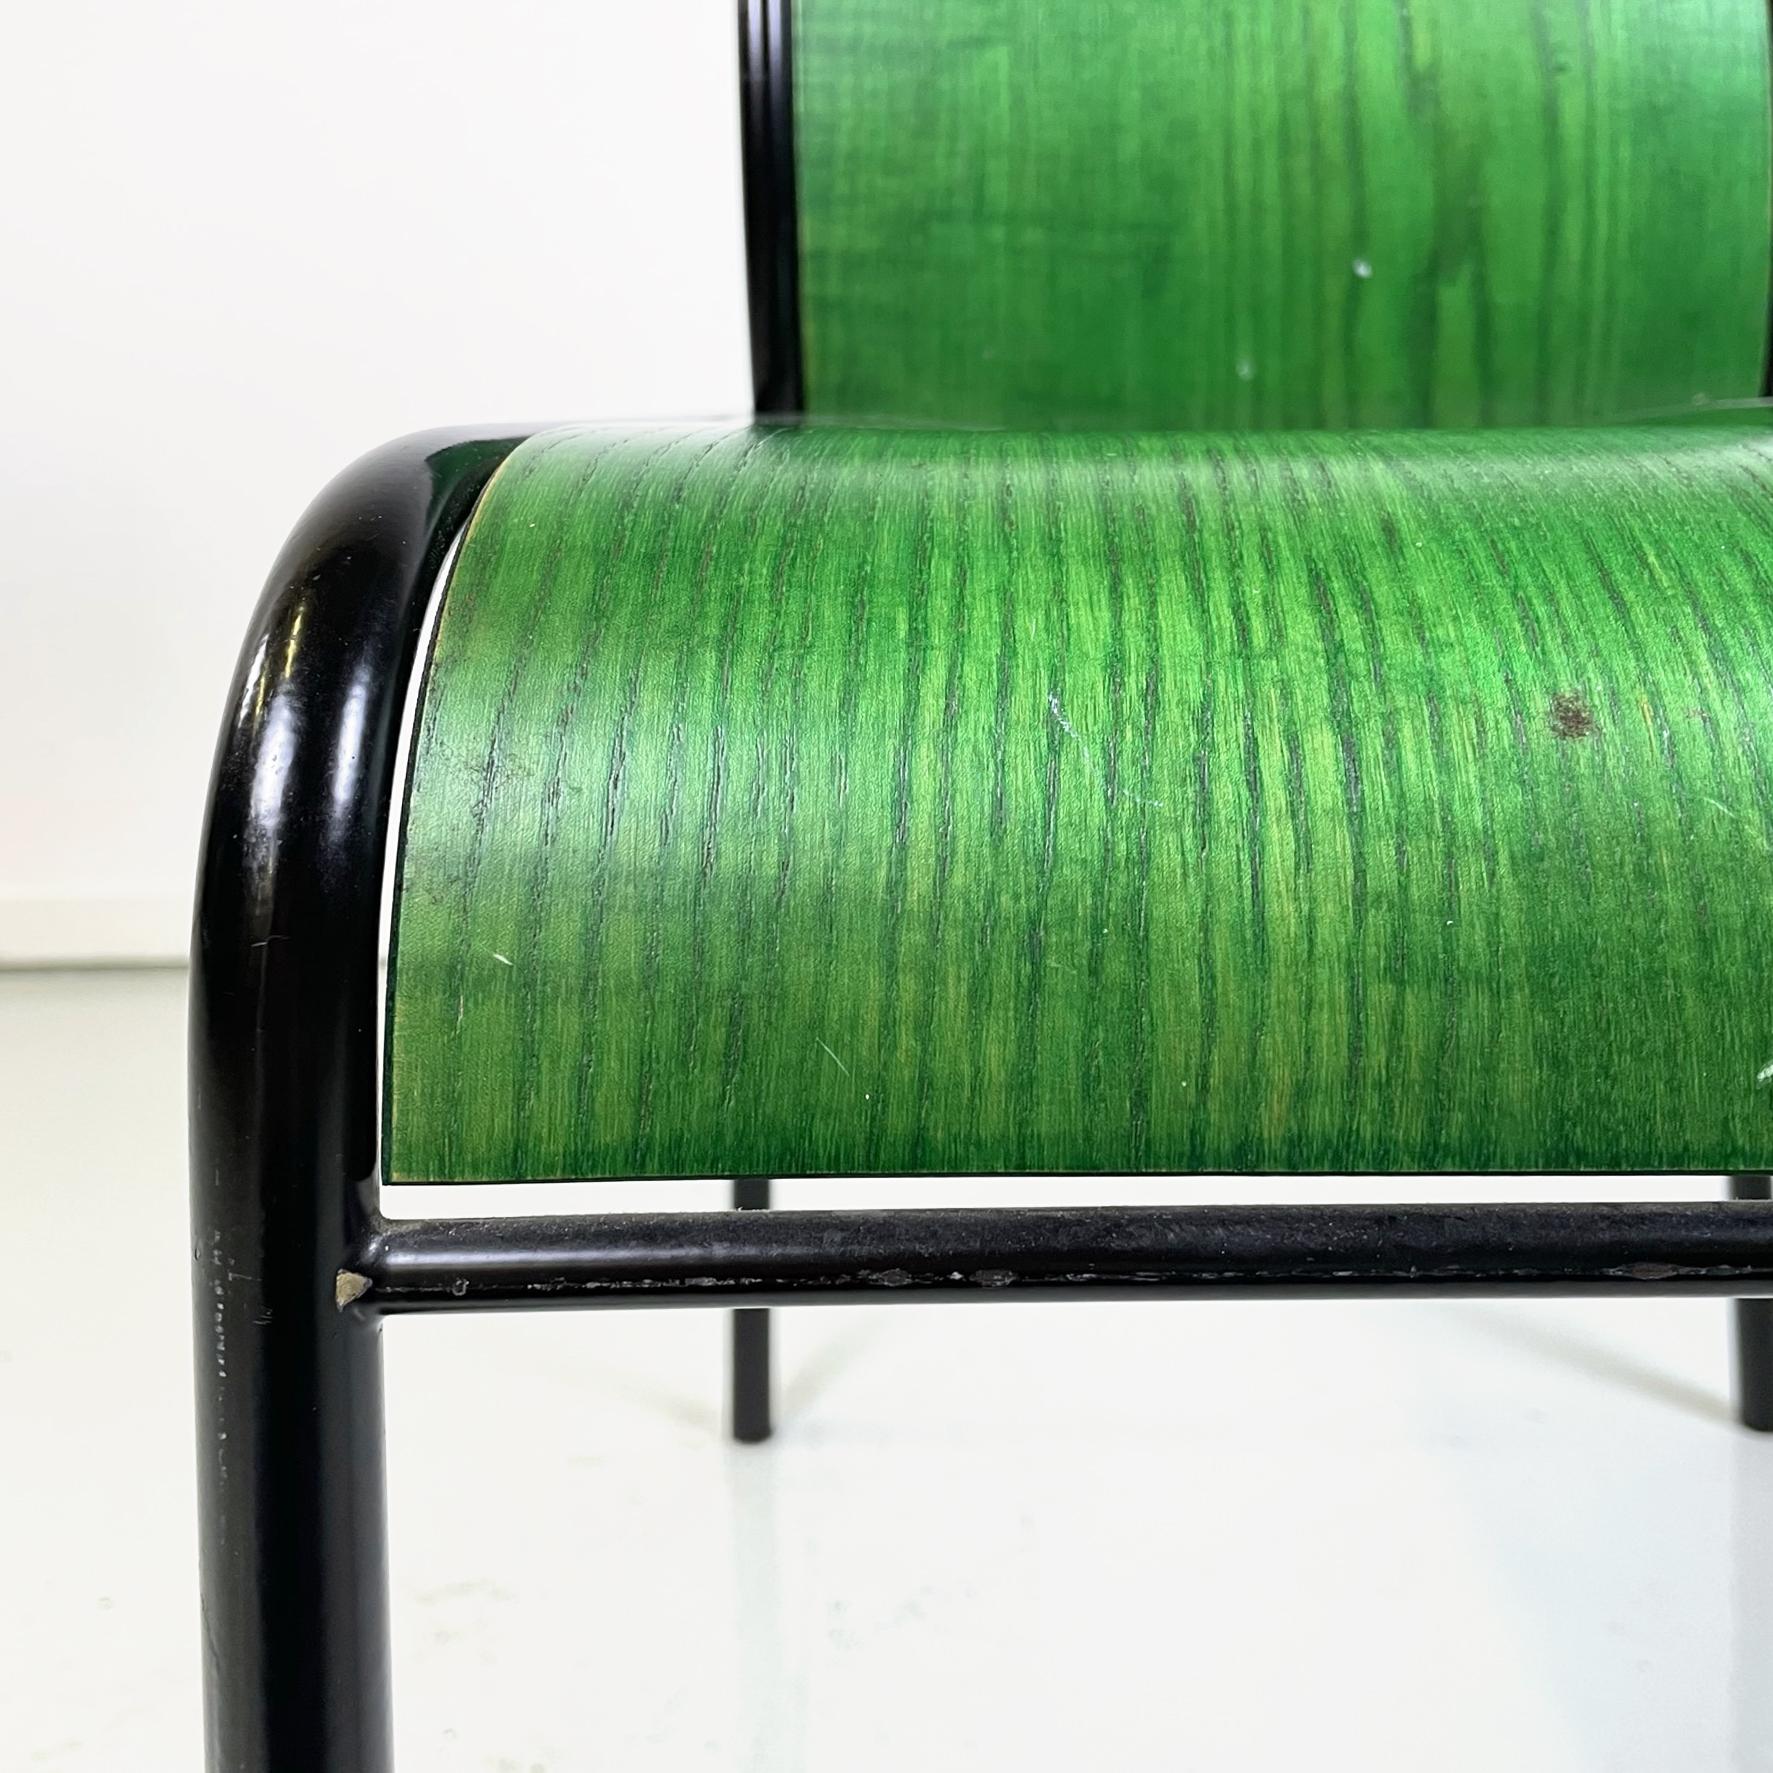 Italian modern Green wood black metal chair Kim by De Lucchi for Memphis, 1980s For Sale 3